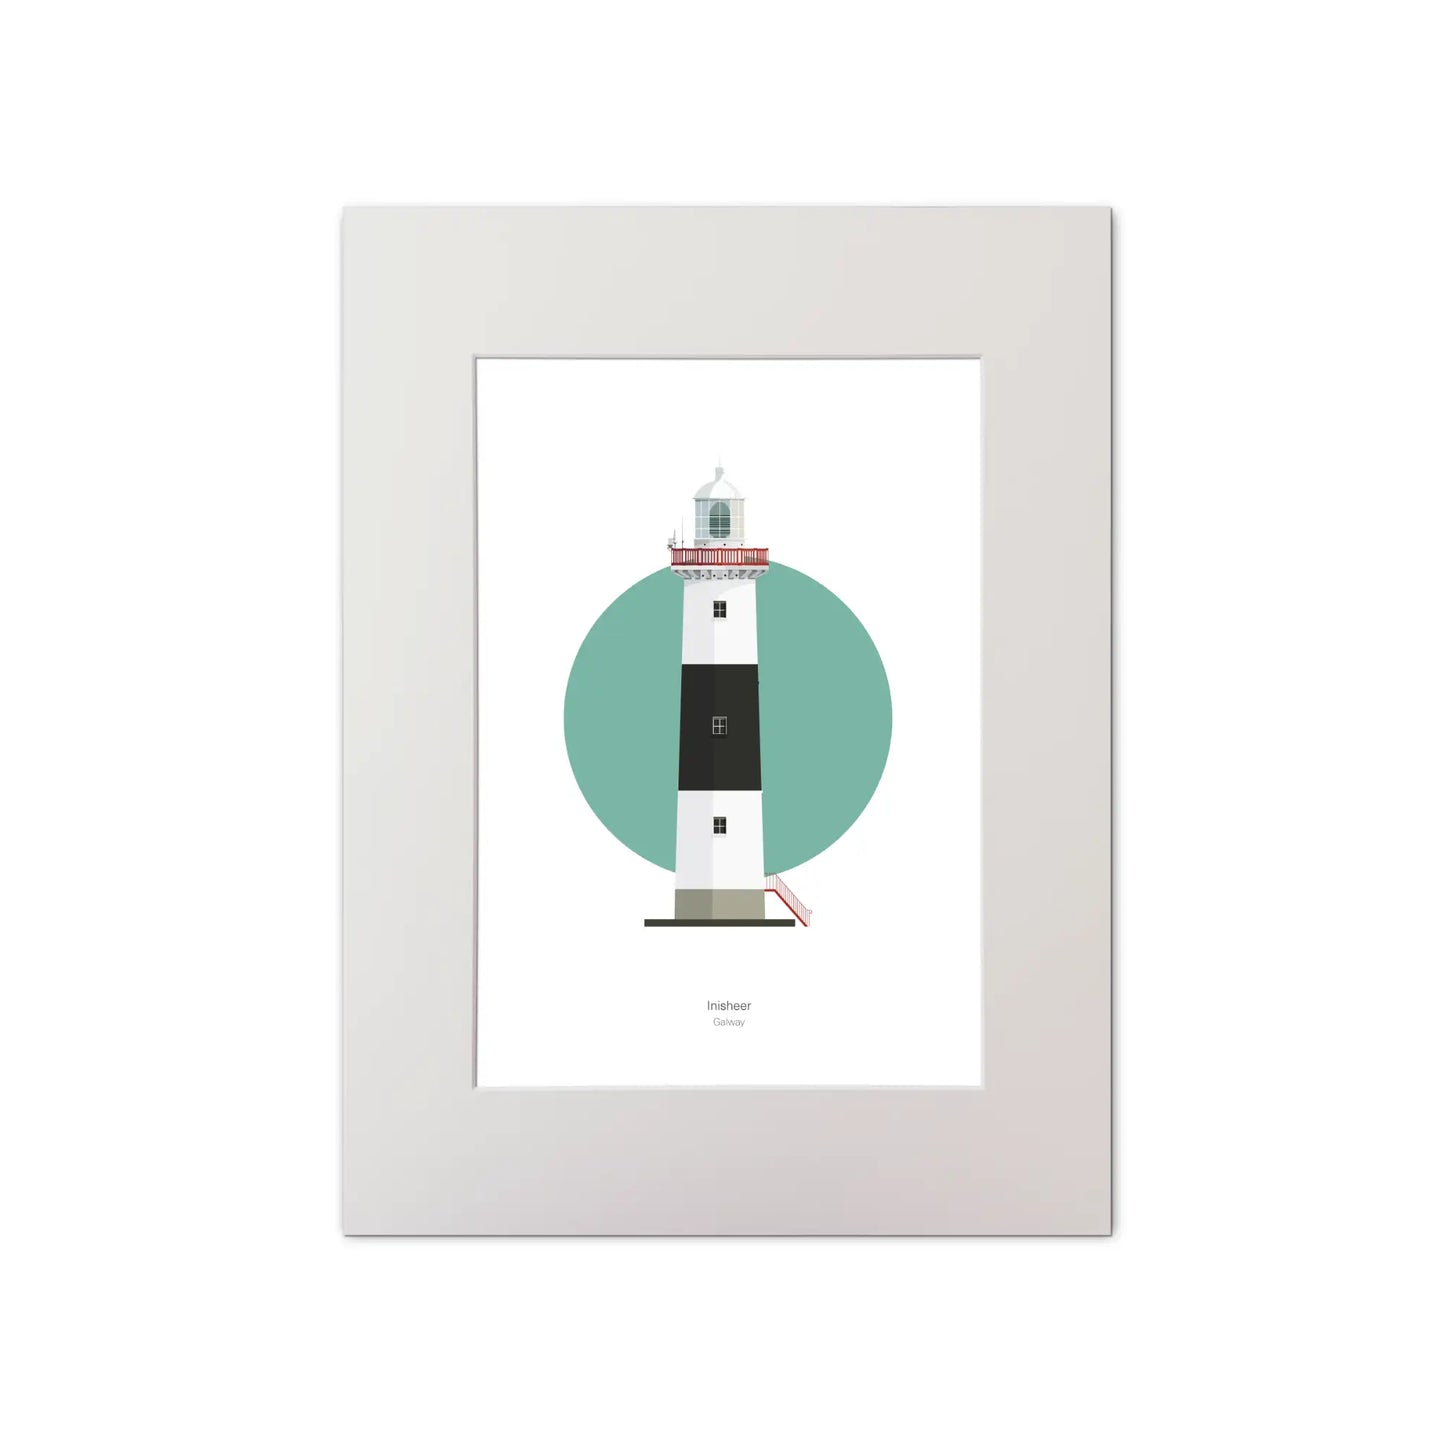 Contemporary graphic illustration of Inisheer lighthouse on a white background inside light blue square, mounted and measuring 30x40cm.